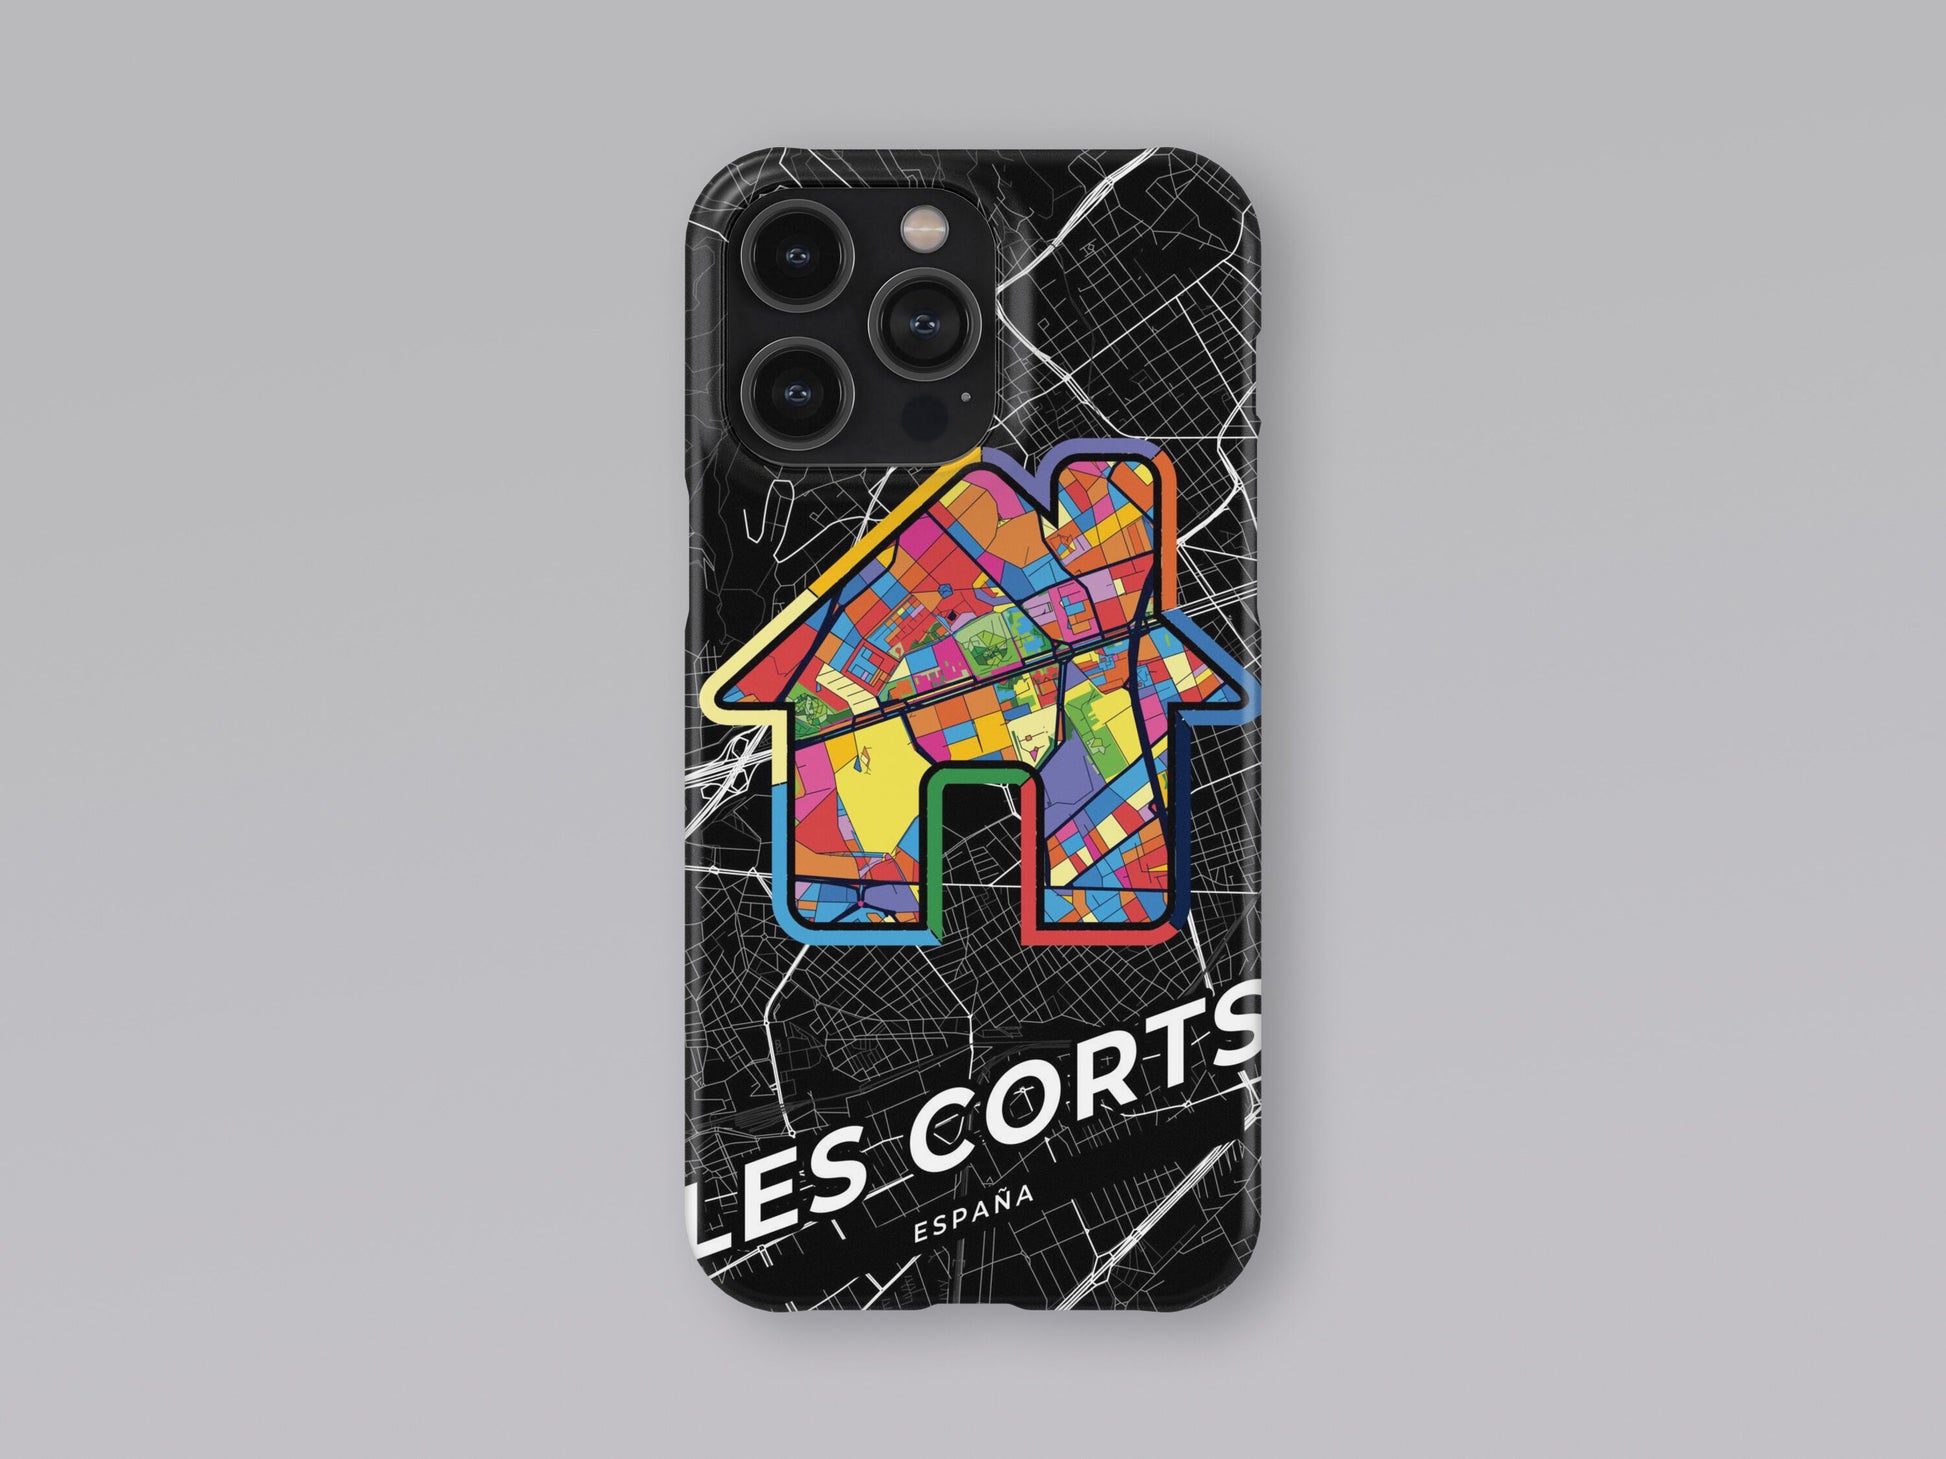 Les Corts Spain slim phone case with colorful icon. Birthday, wedding or housewarming gift. Couple match cases. 3